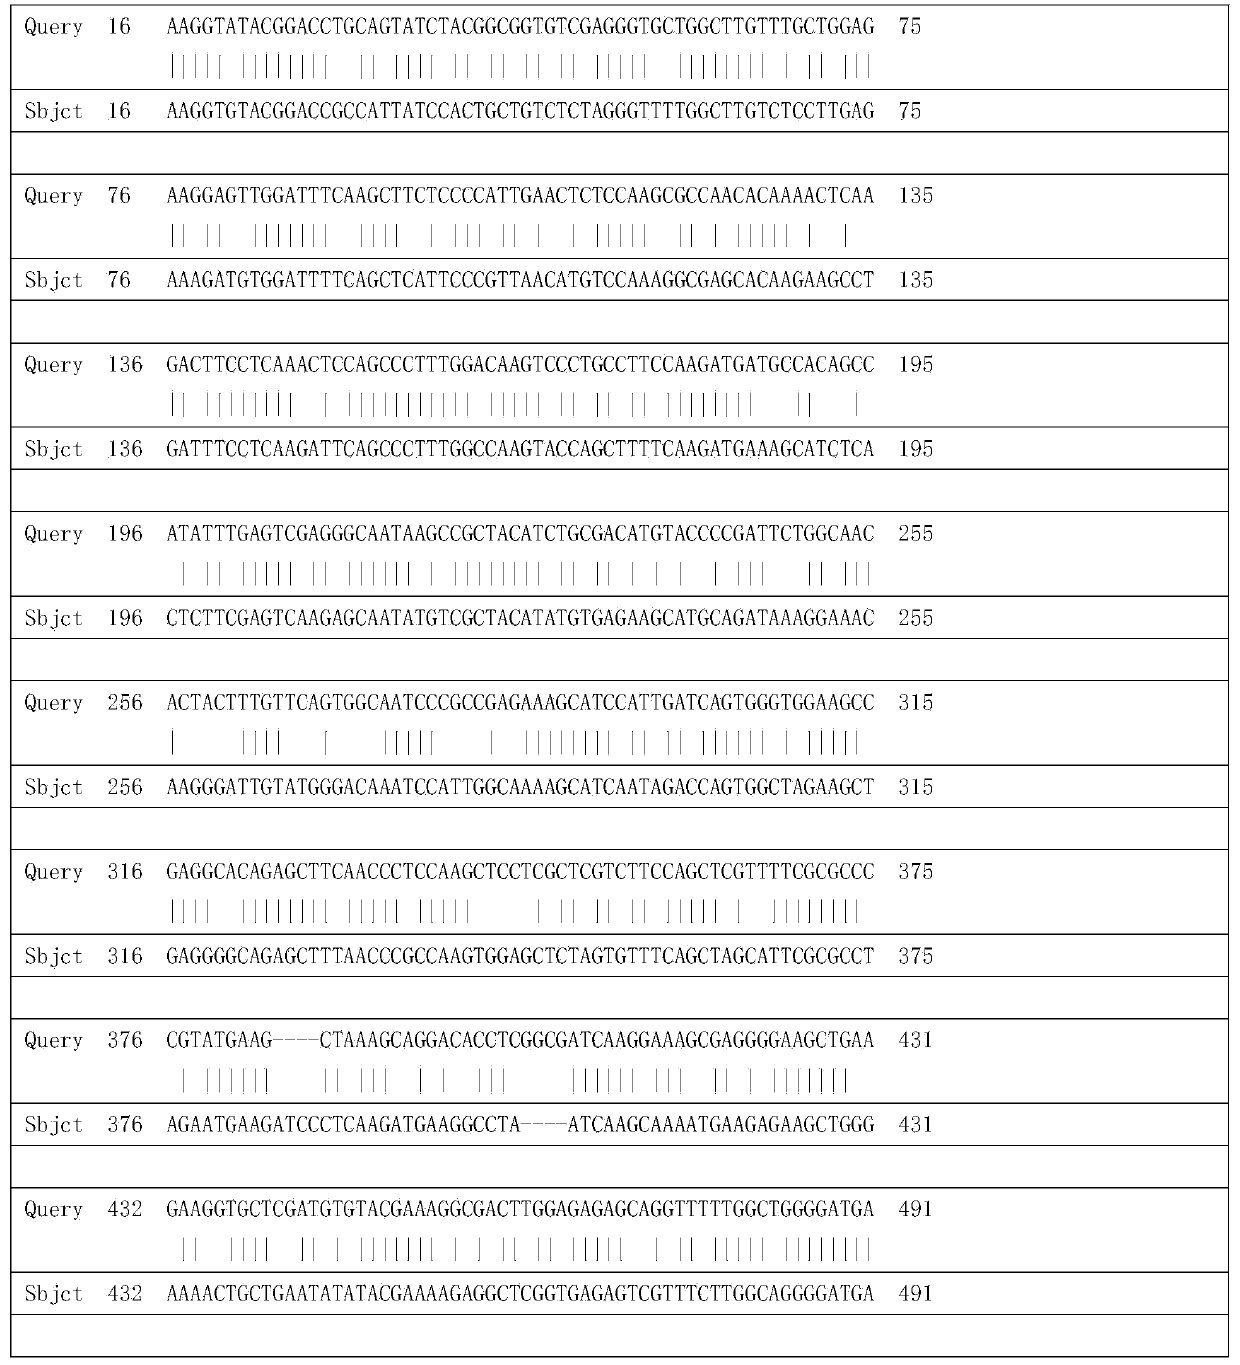 Tulip glutathione S-transferase TfGST protein and encoding gene thereof